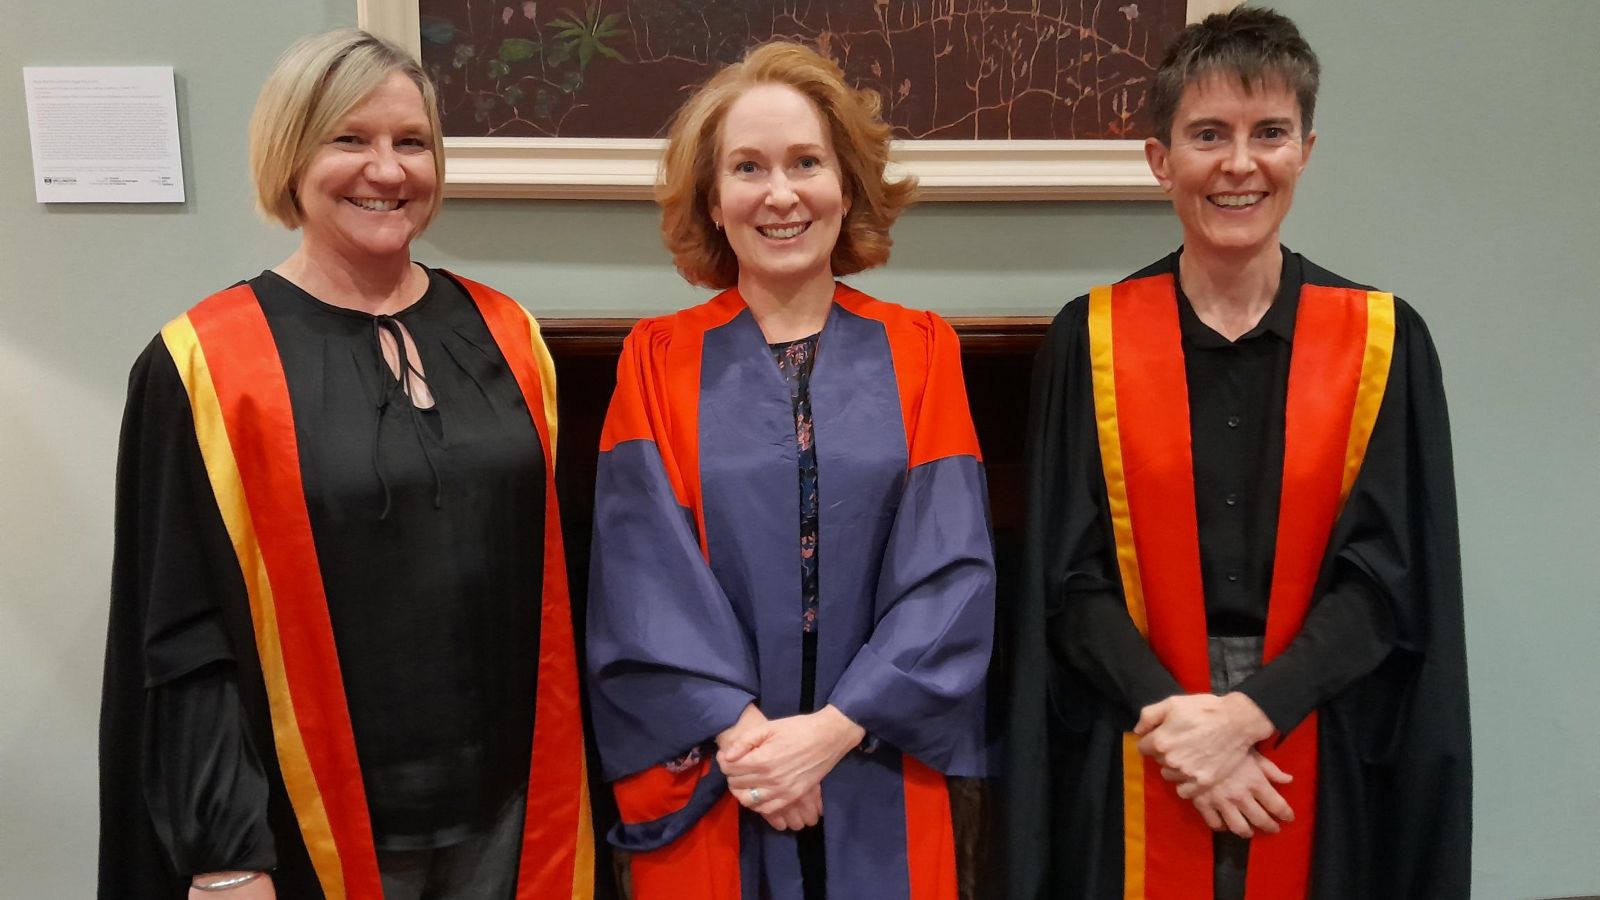 Sarah Ross, flanked by two other academics, dressed in gowns at her inaugural lecture.